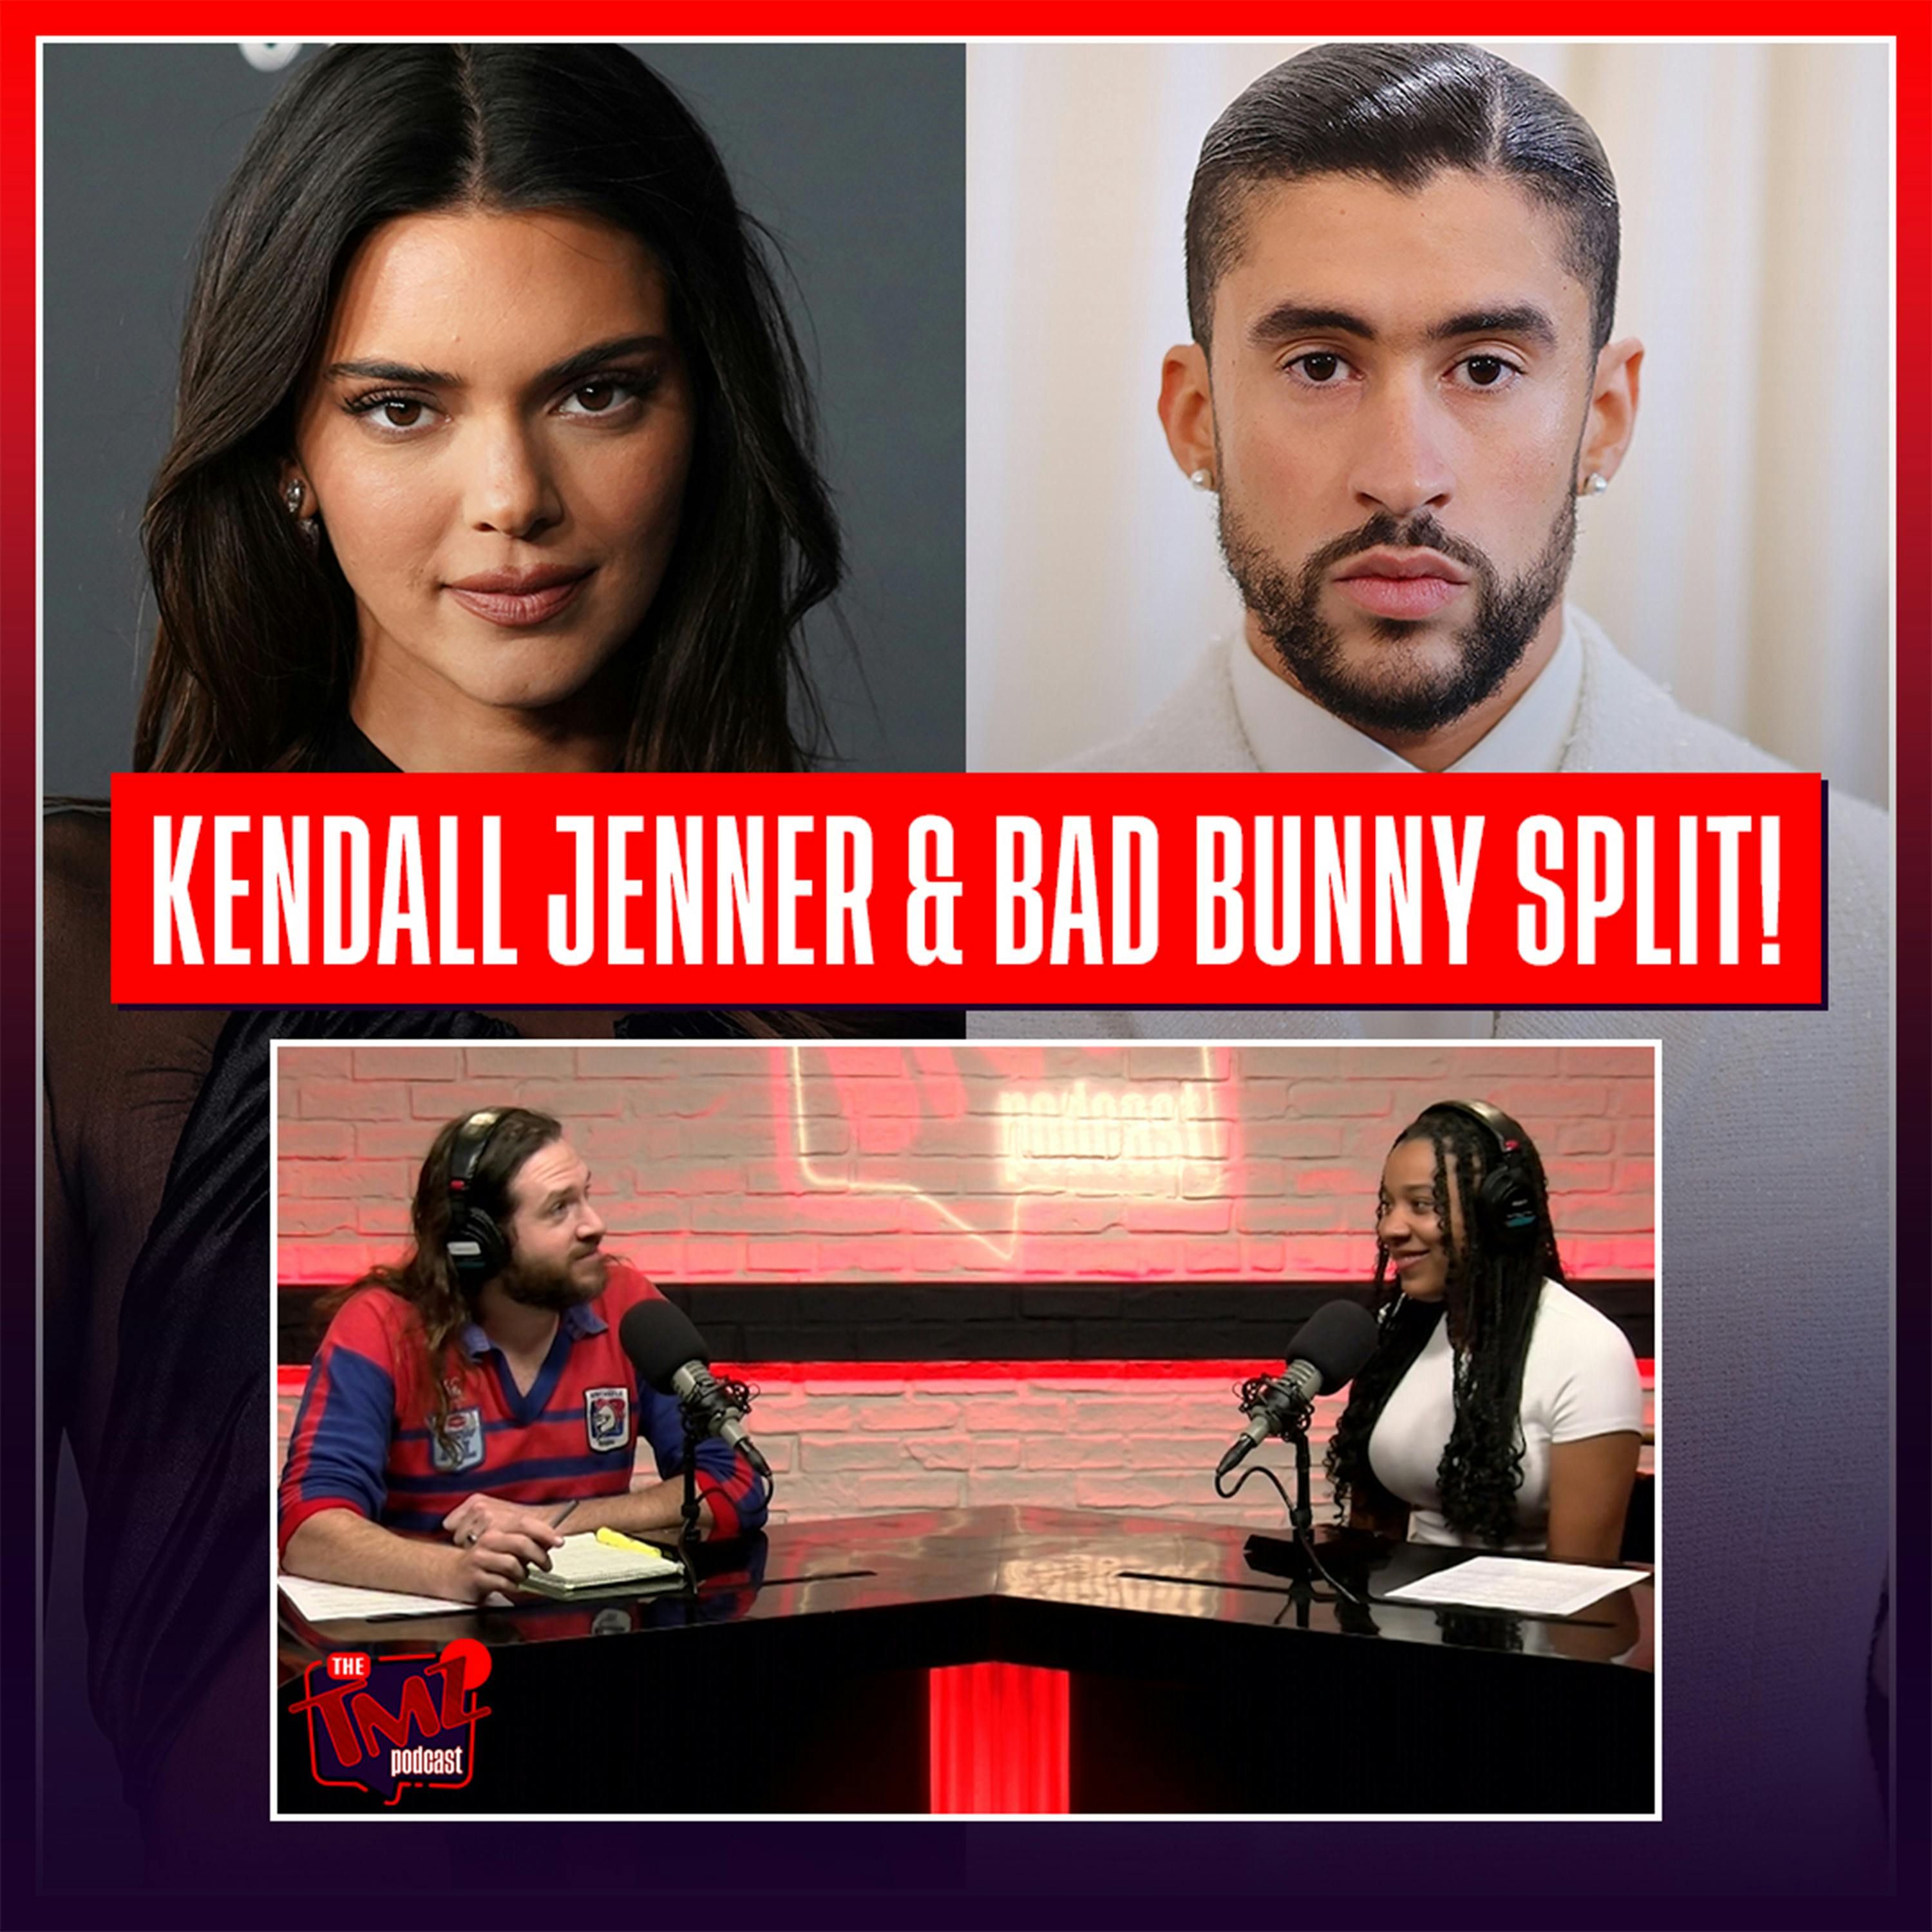 Kendall Jenner and Bad Bunny Have Split After Less Than A Year Together